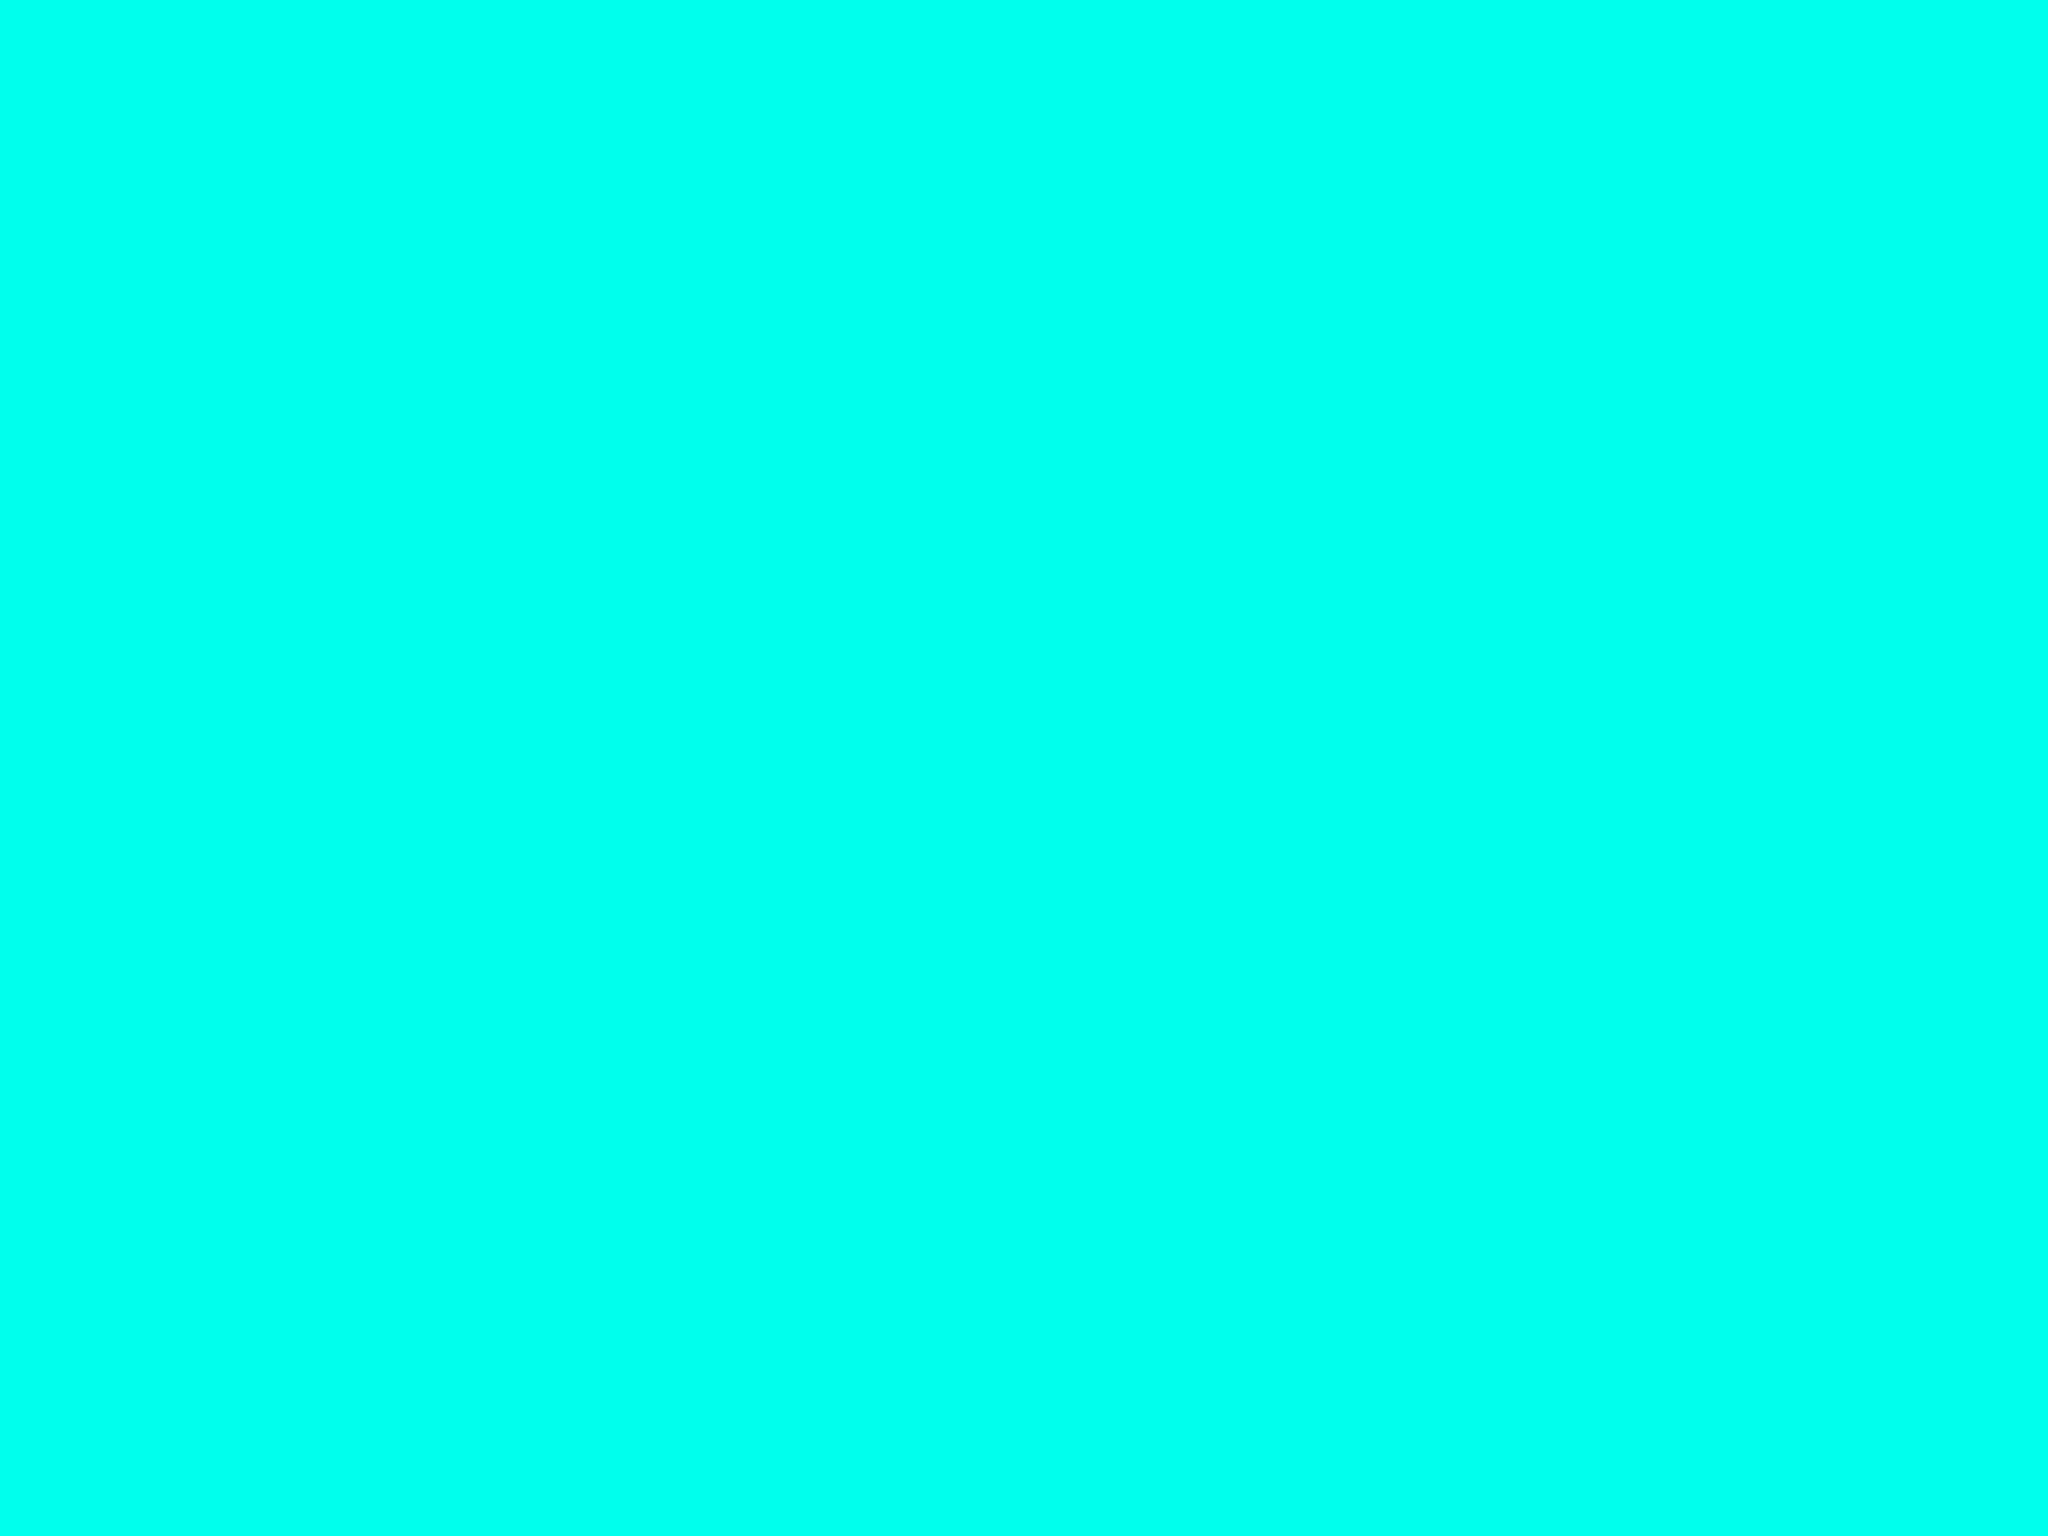 2048x1536 -turquoise-blue-solid-color-background.jpg (2048Ã